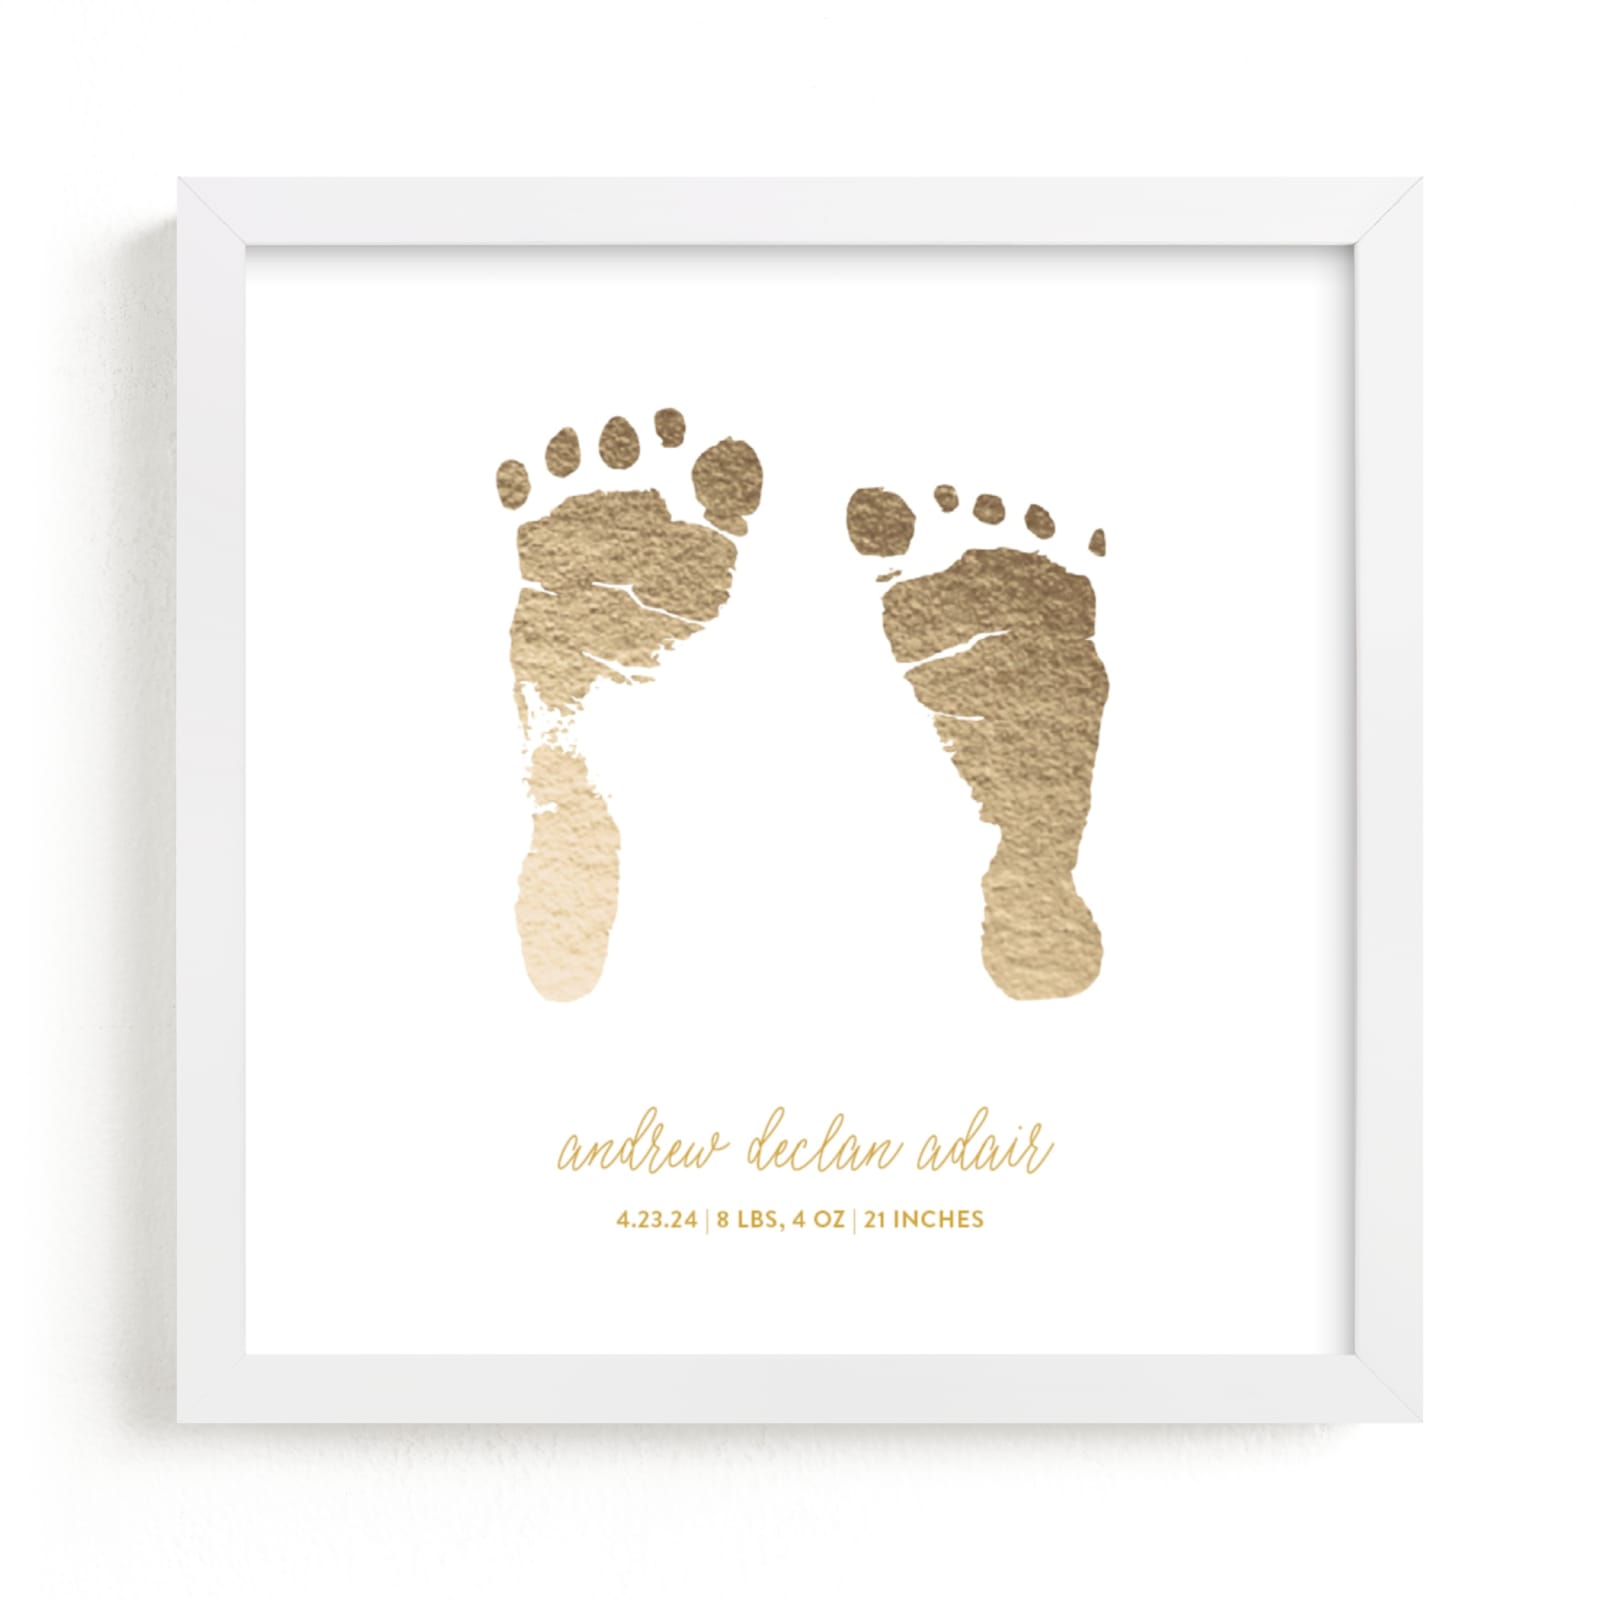 This is a gold photos to art by Minted Custom called Custom Footprints Foil Art.